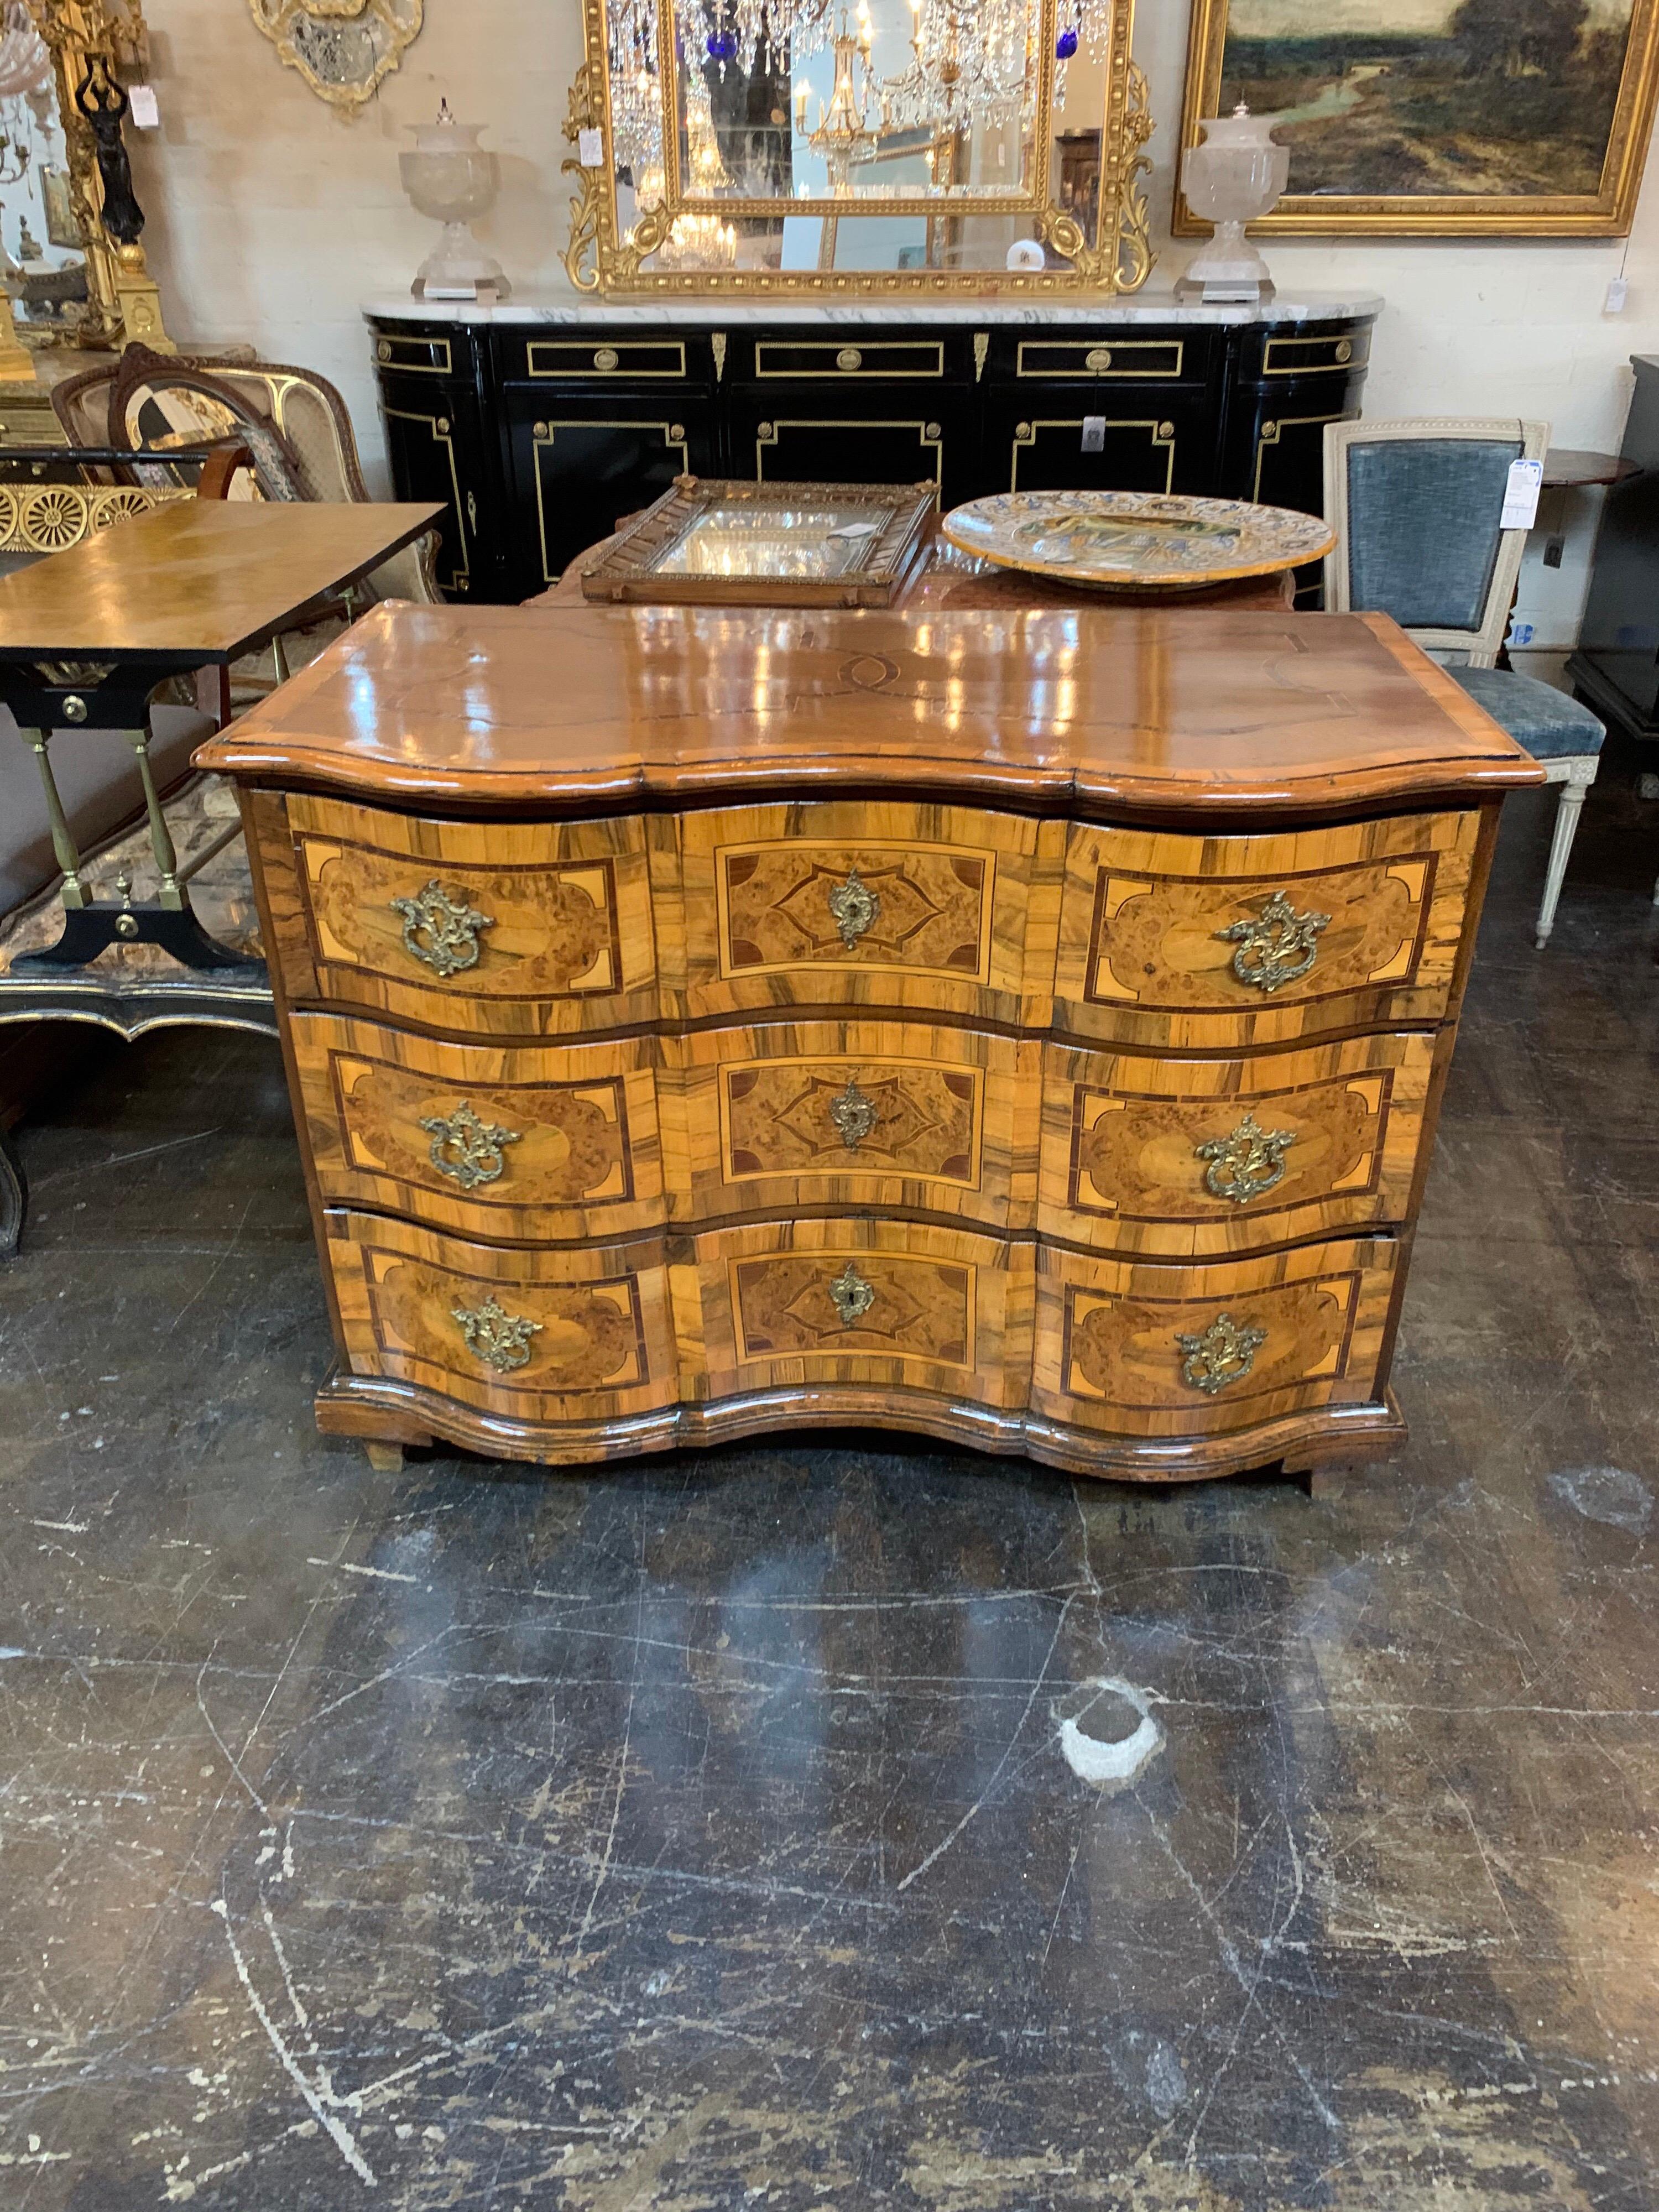 Exceptional south German serpentine shaped commode with gorgeous inlaid wood. A truly elegant piece for a fine home!